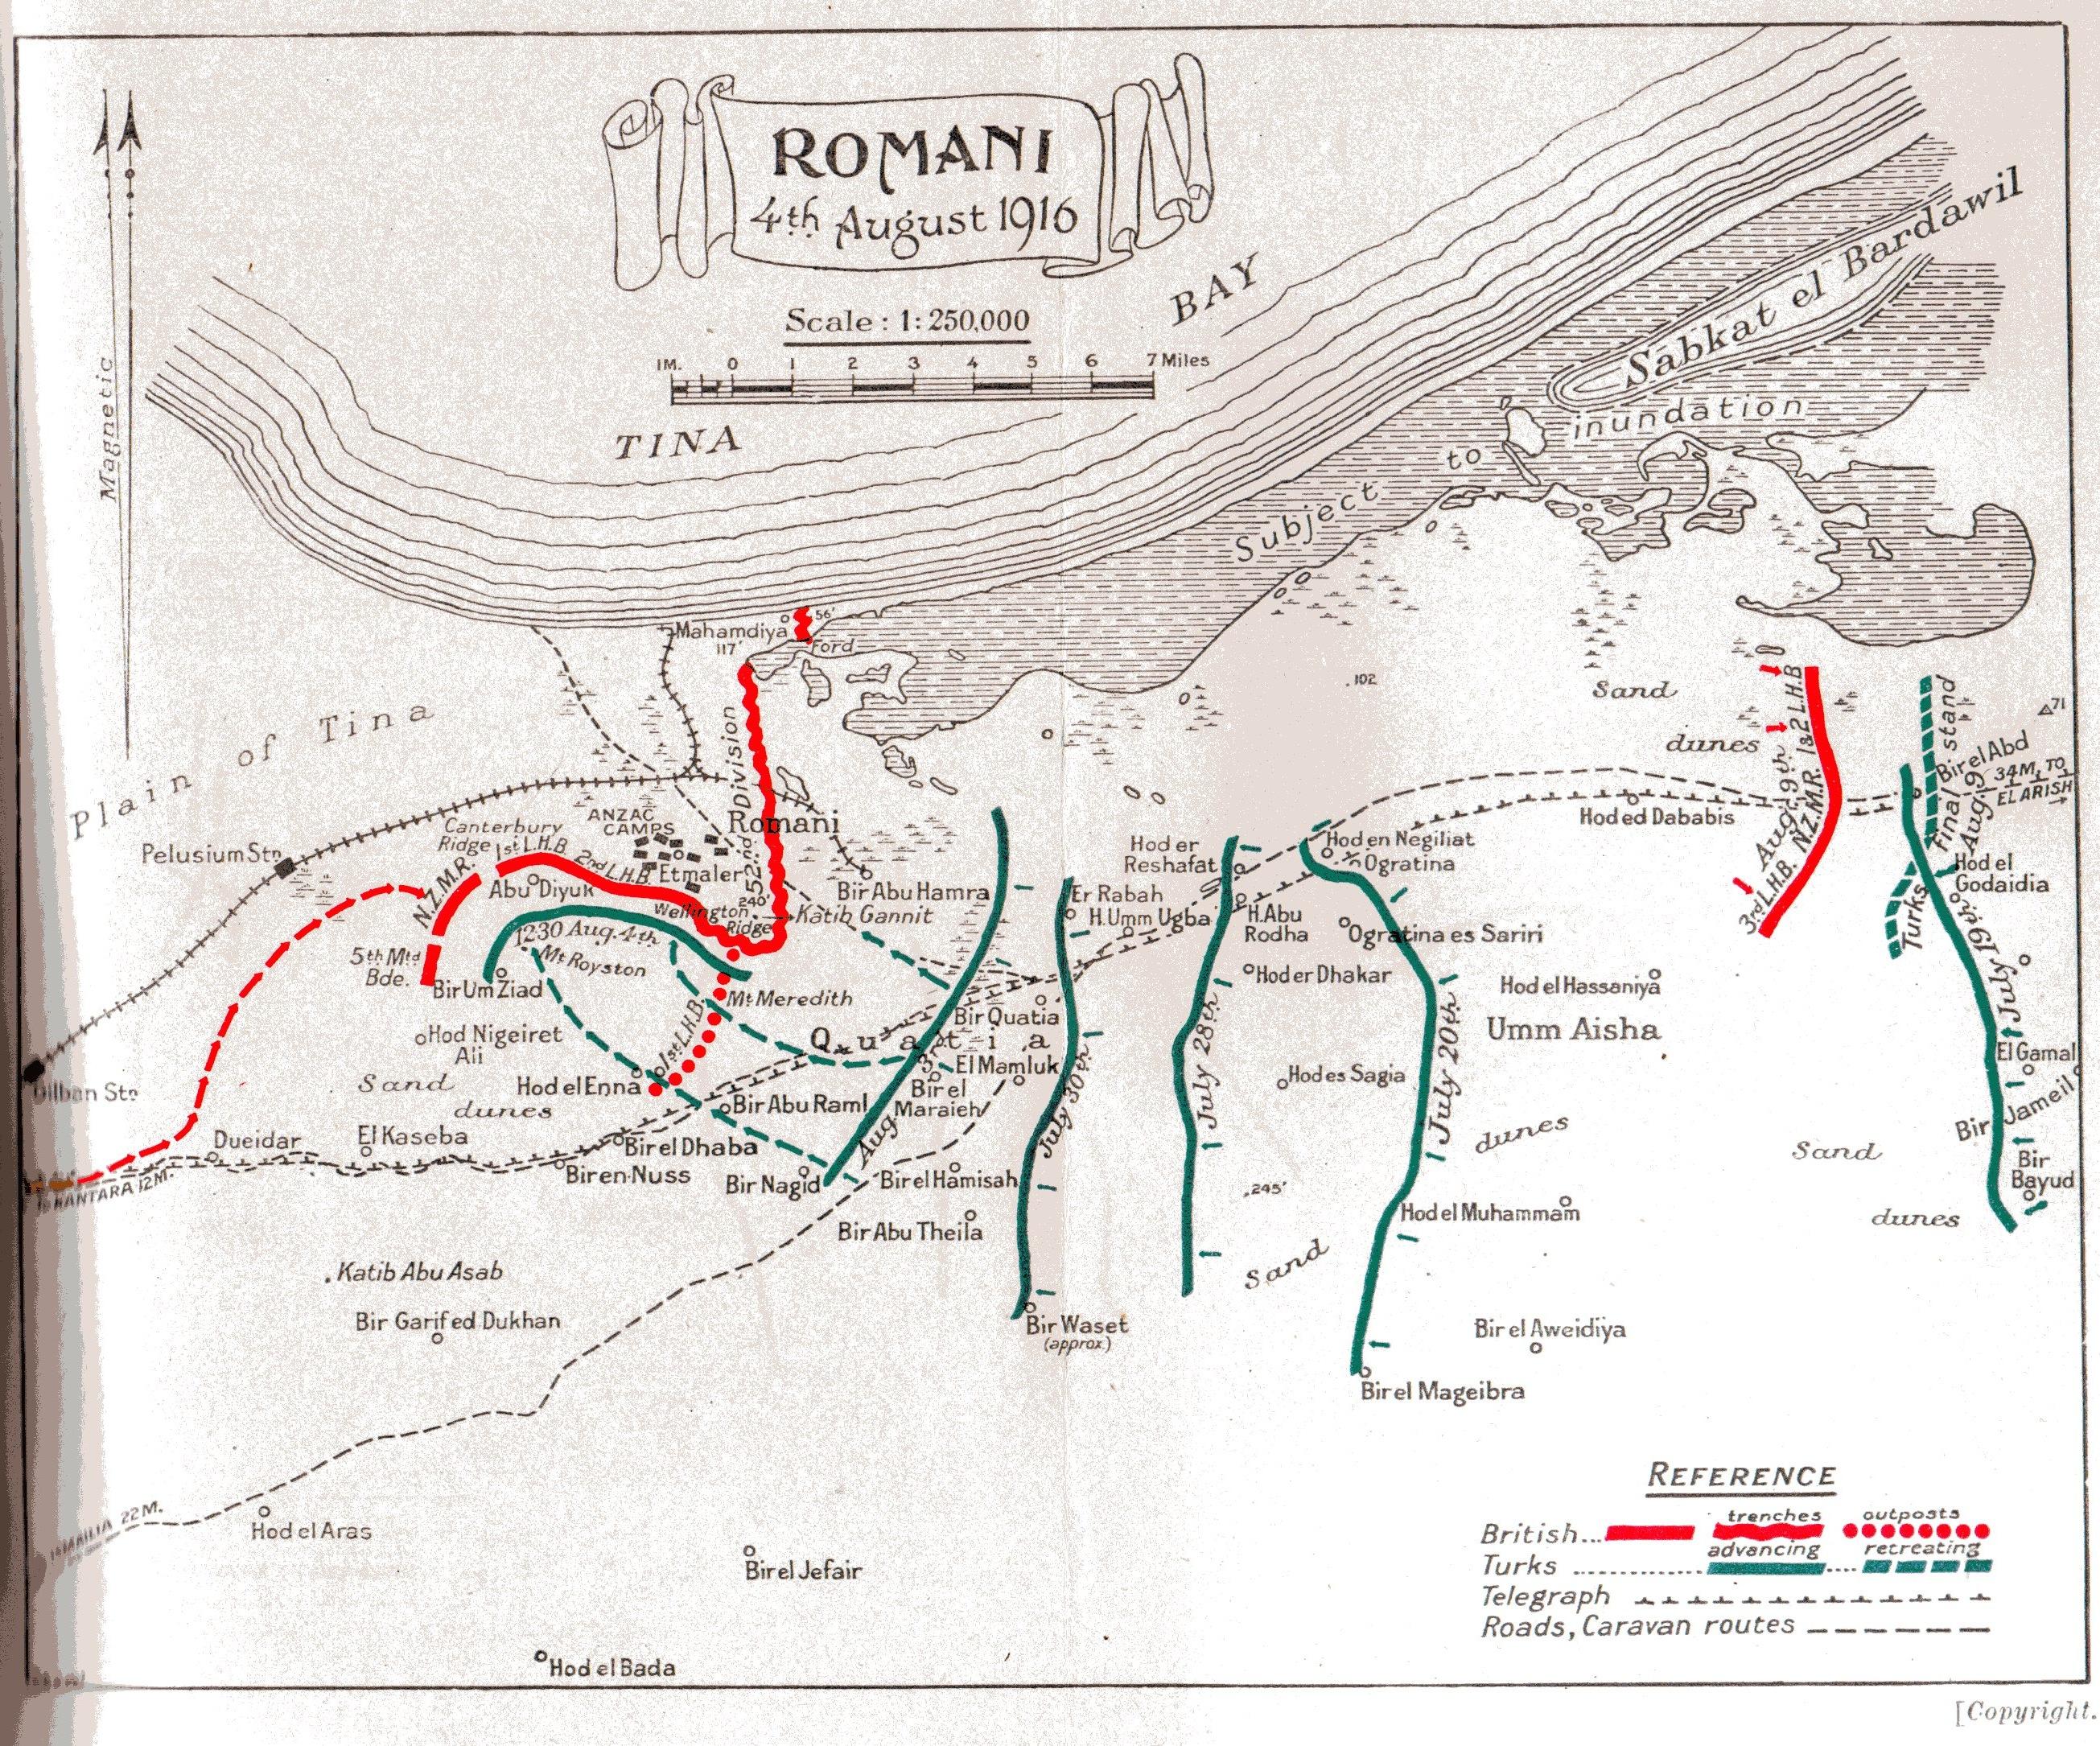 Map of Romani area showing force dispositions from 19 July to 9 August 1916. British lines in red; Ottoman army advance and attacks on 3-4 August shown in green. 